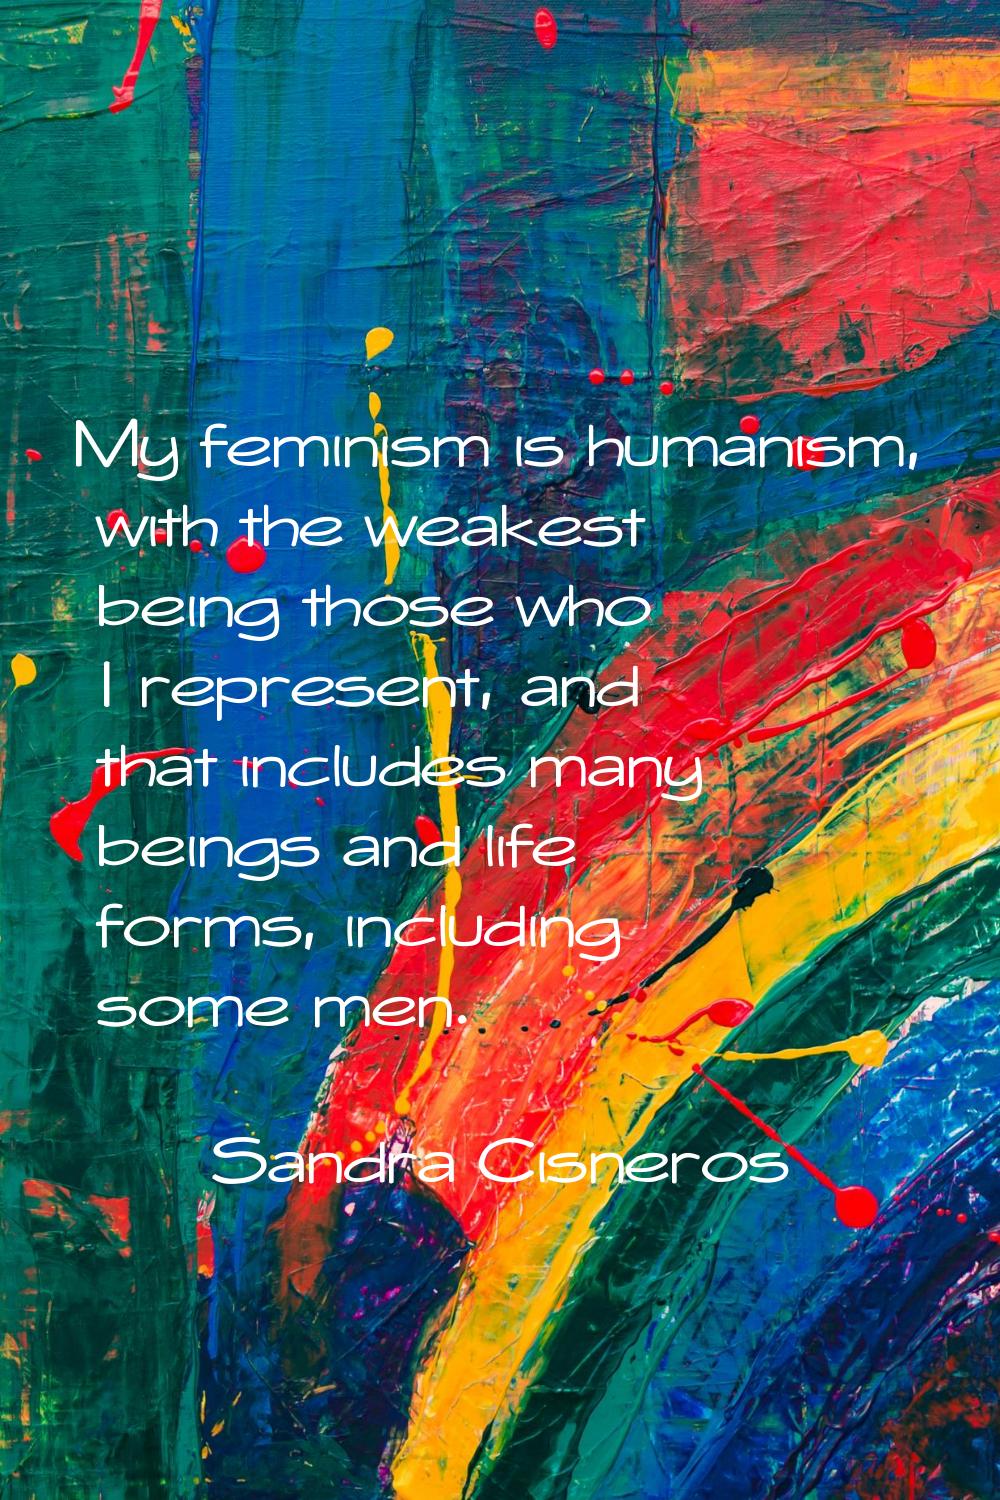 My feminism is humanism, with the weakest being those who I represent, and that includes many being